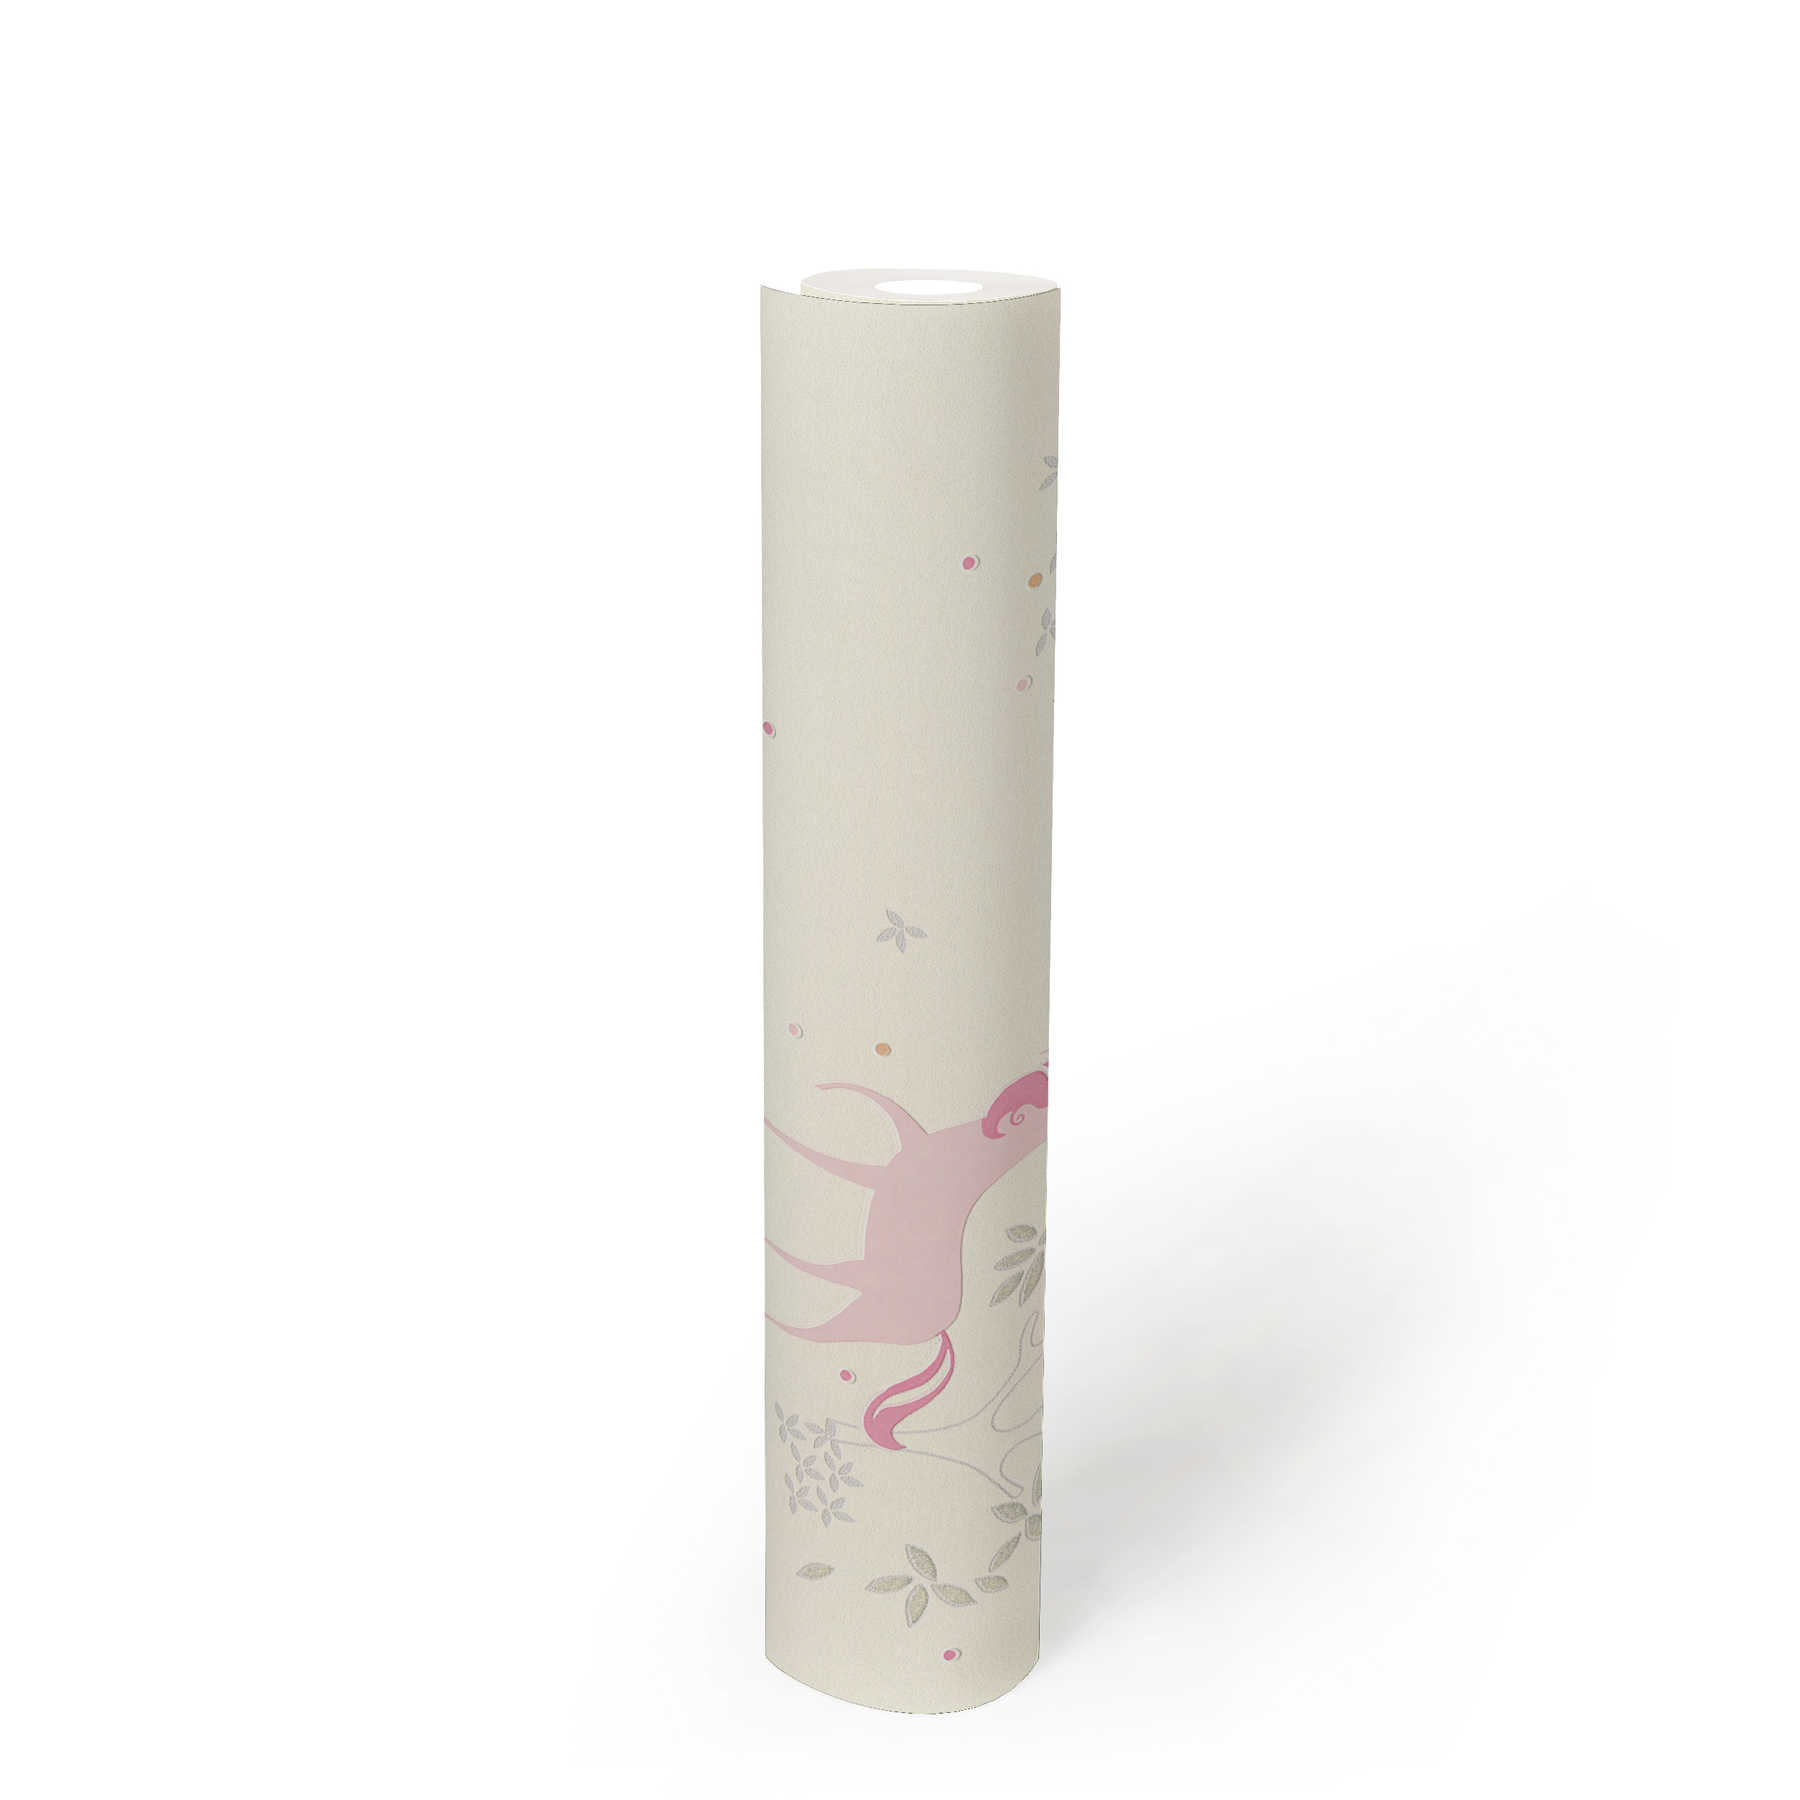             Unicorn non-woven wallpaper with dots & silver glitter - pink, grey
        